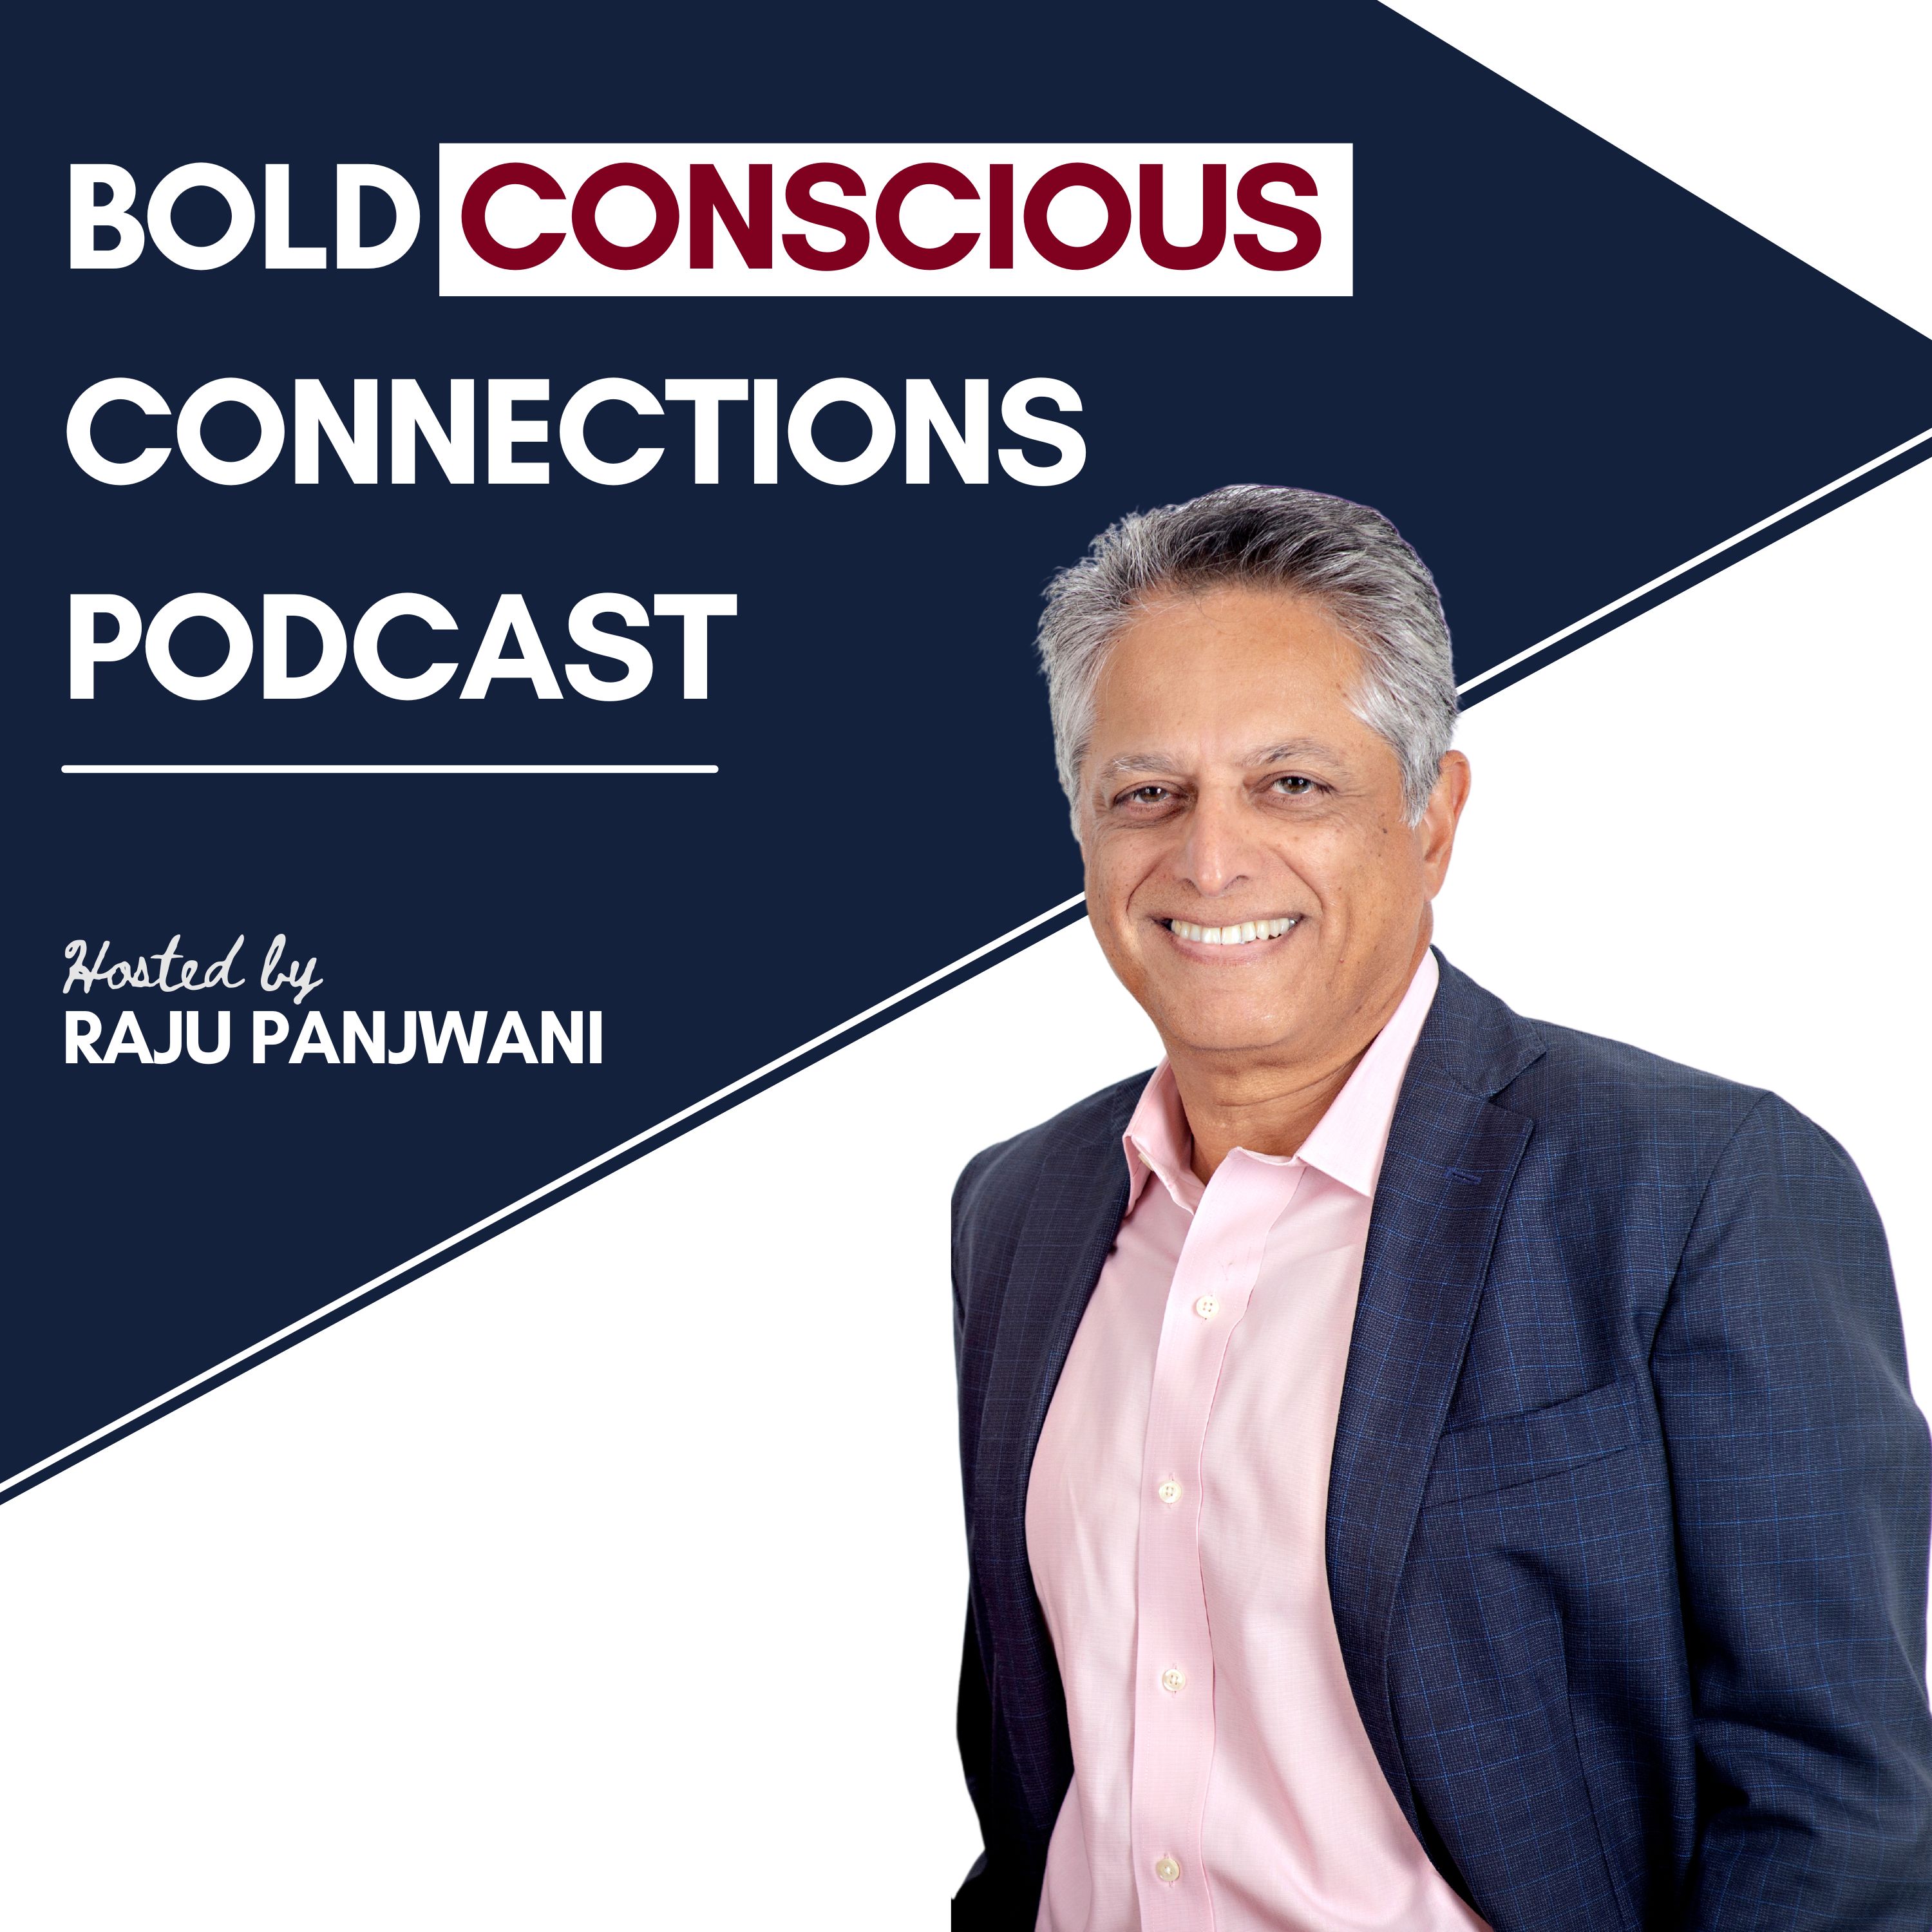 BOLD CONSCIOUS CONNECTIONS